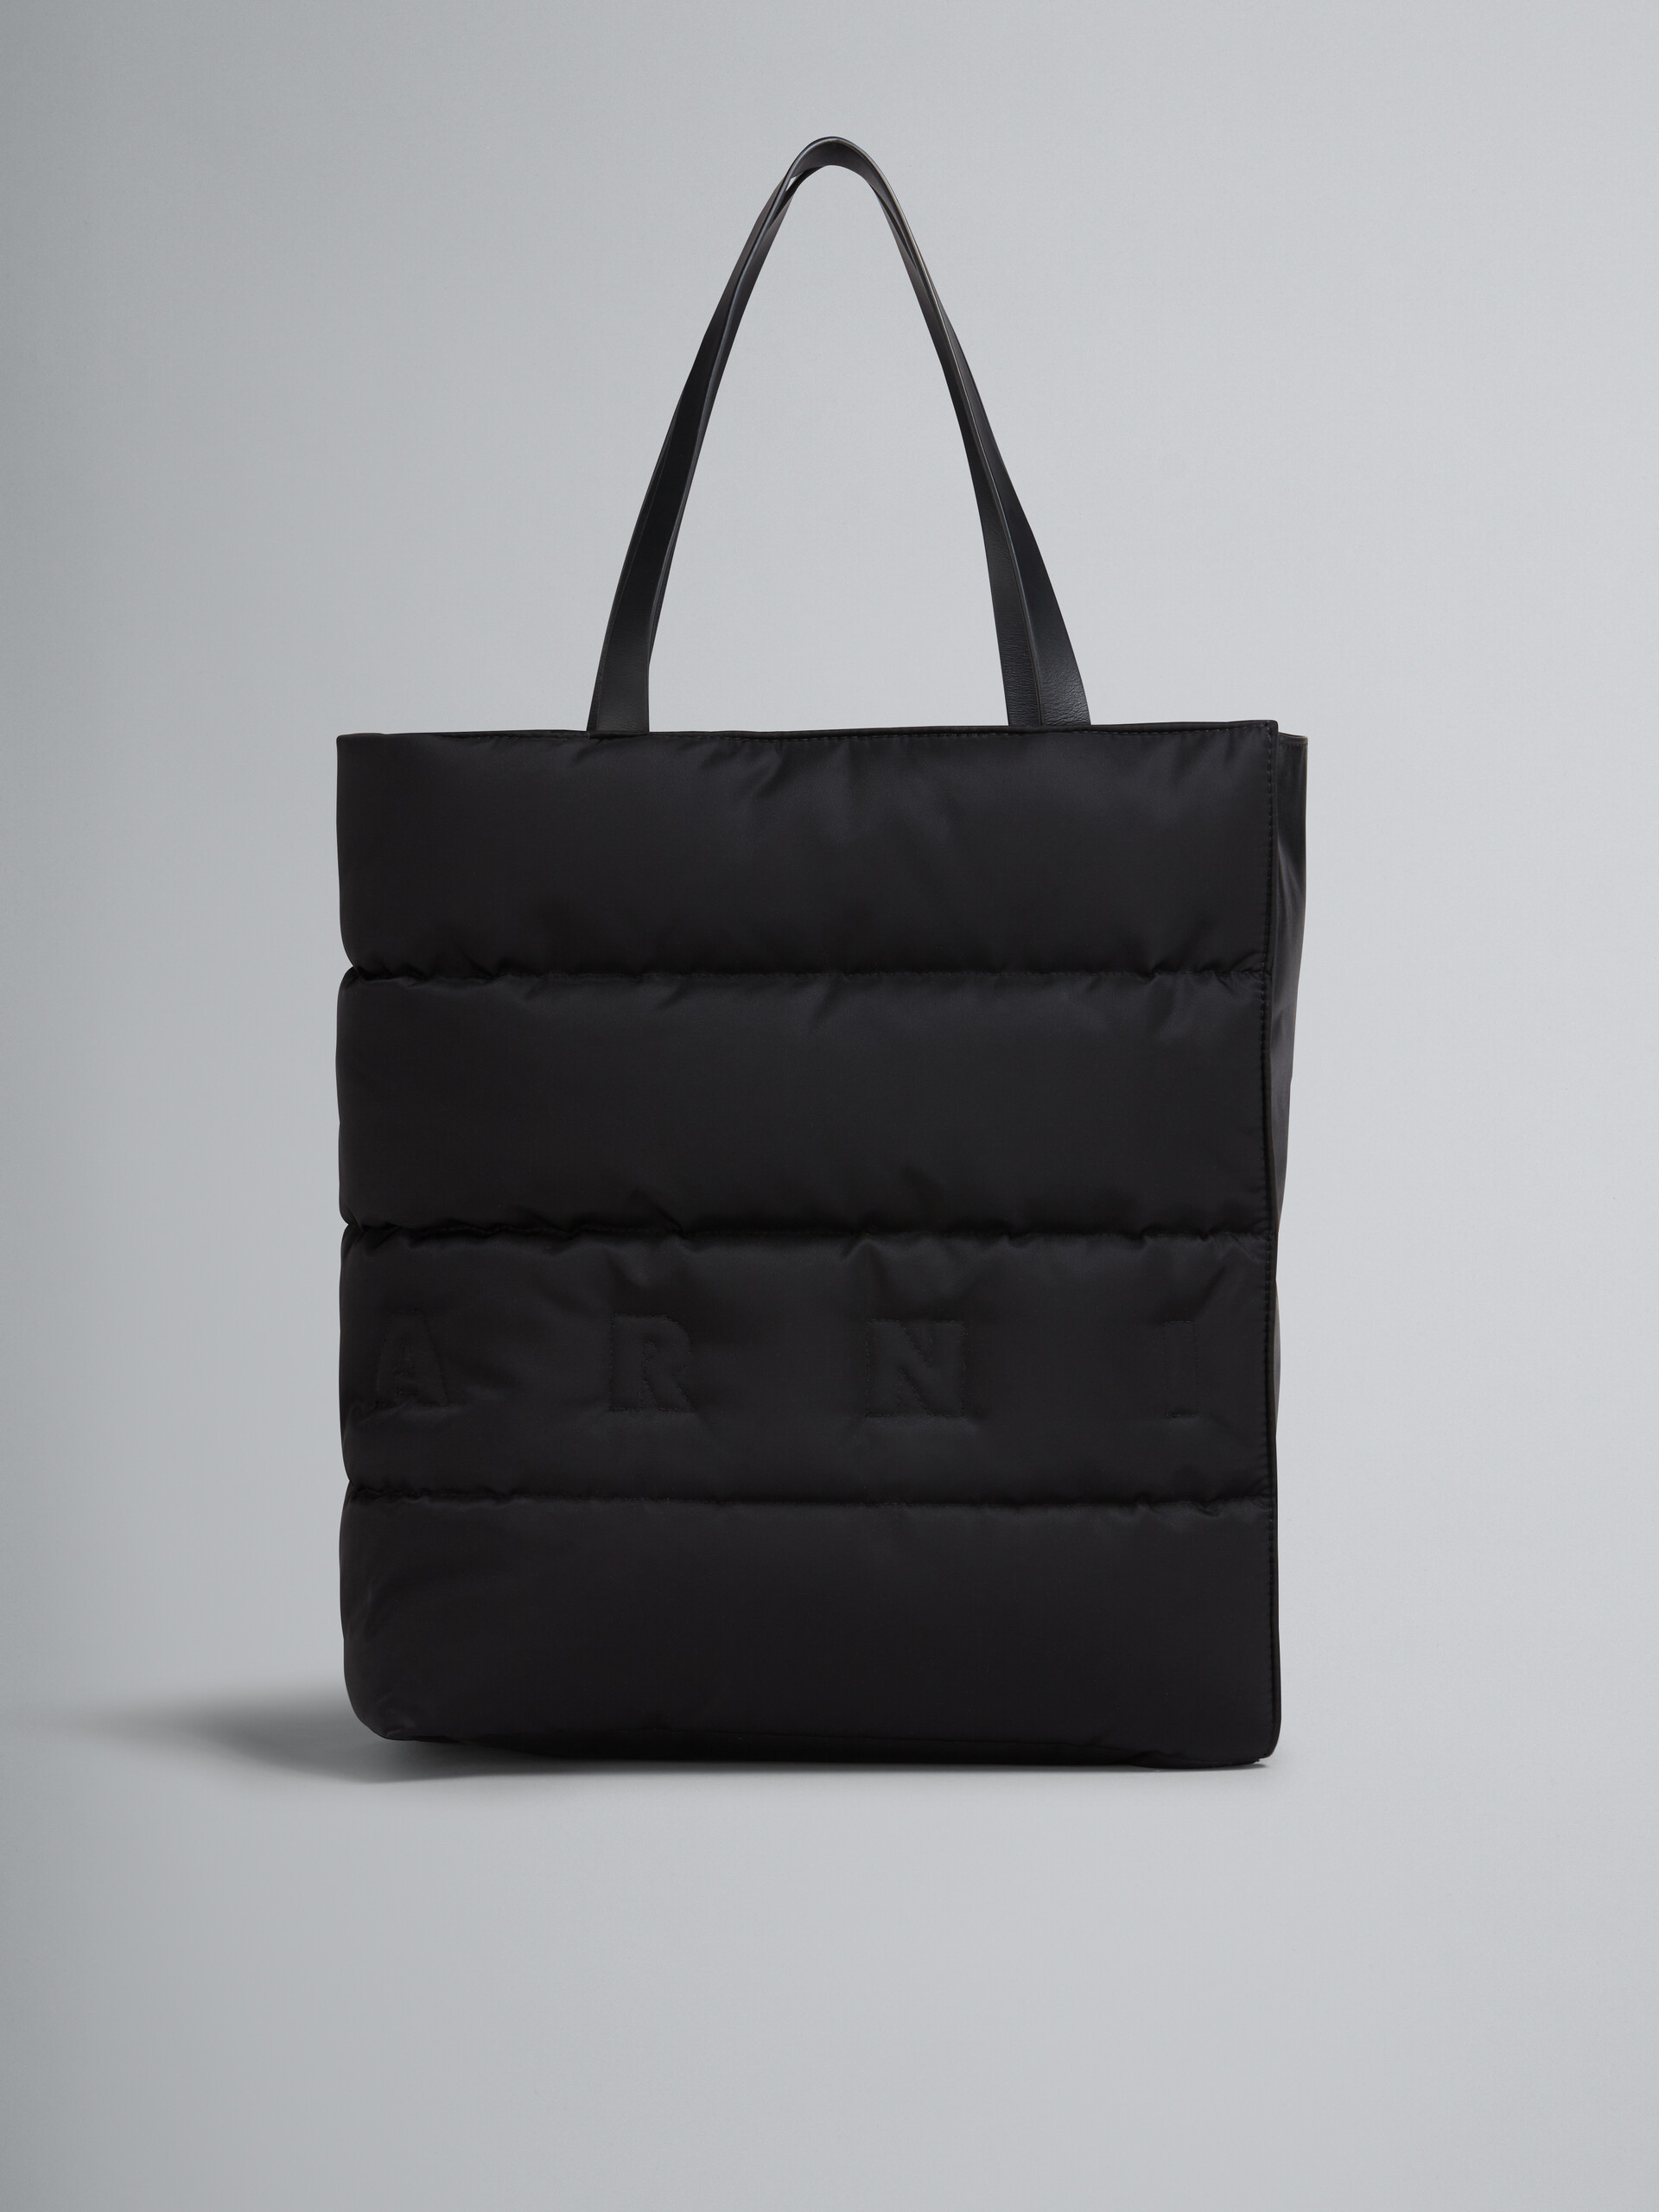 Black MUSEO SOFT tote bag in quilted nylon - Shopping Bags - Image 1